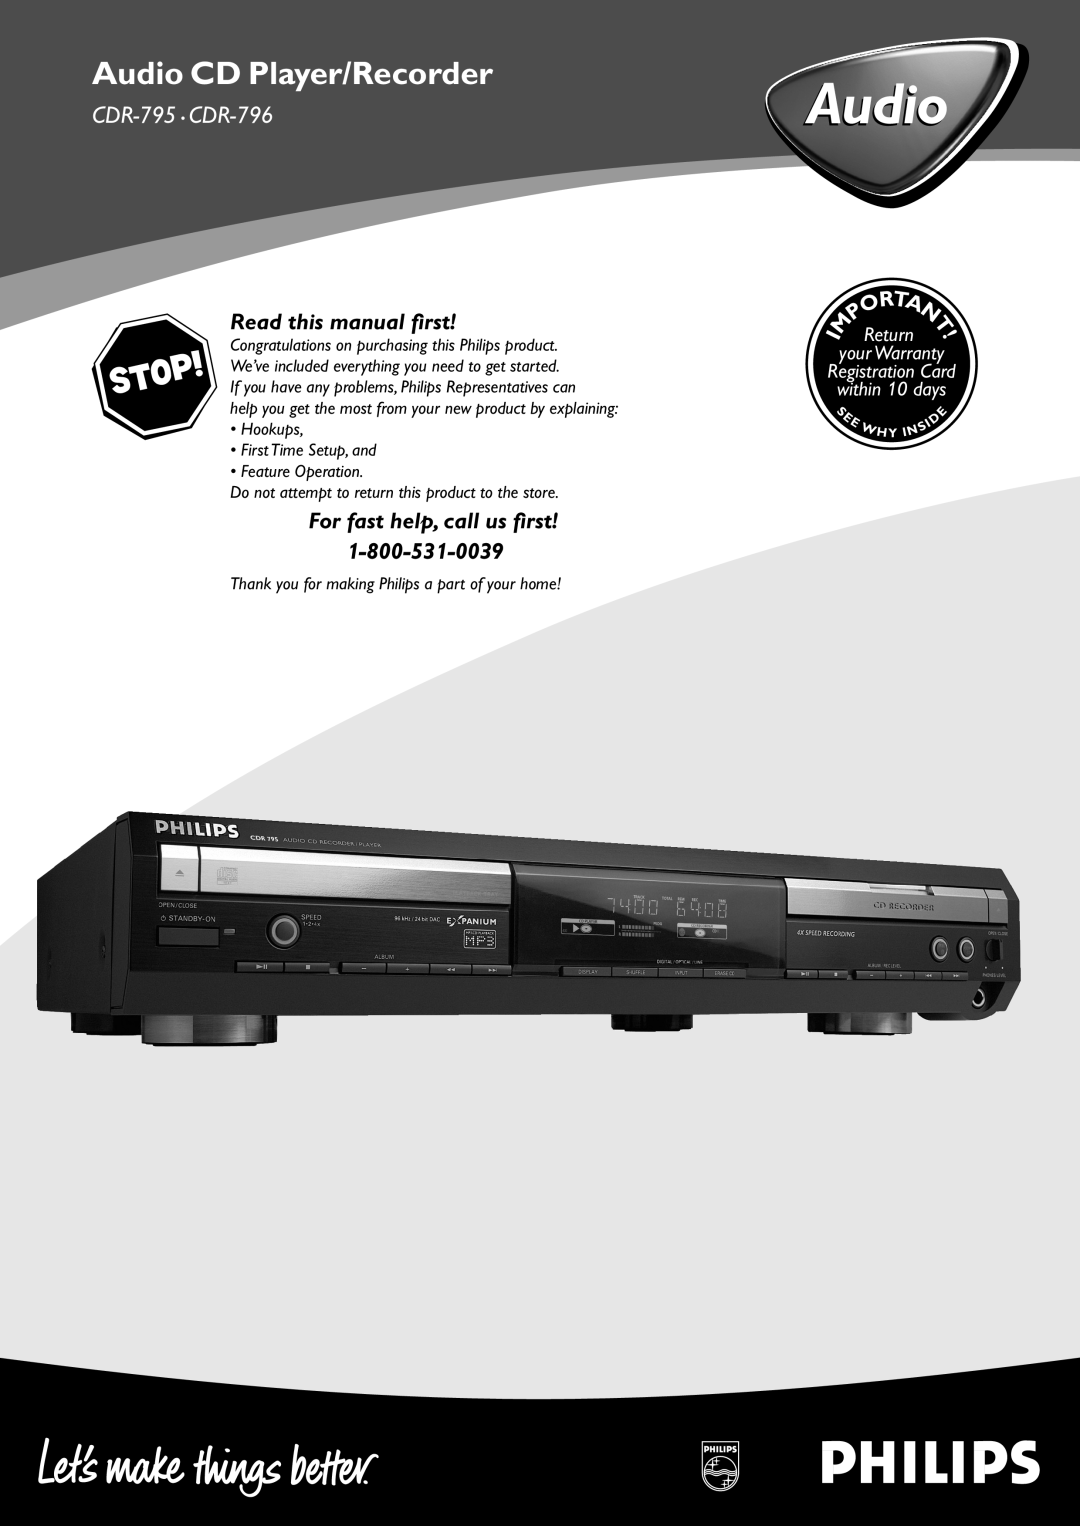 Philips manual Audio CD Player/Recorder, Read this manual ﬁrst, For fast help, call us ﬁrst, CDR-795 CDR-796 